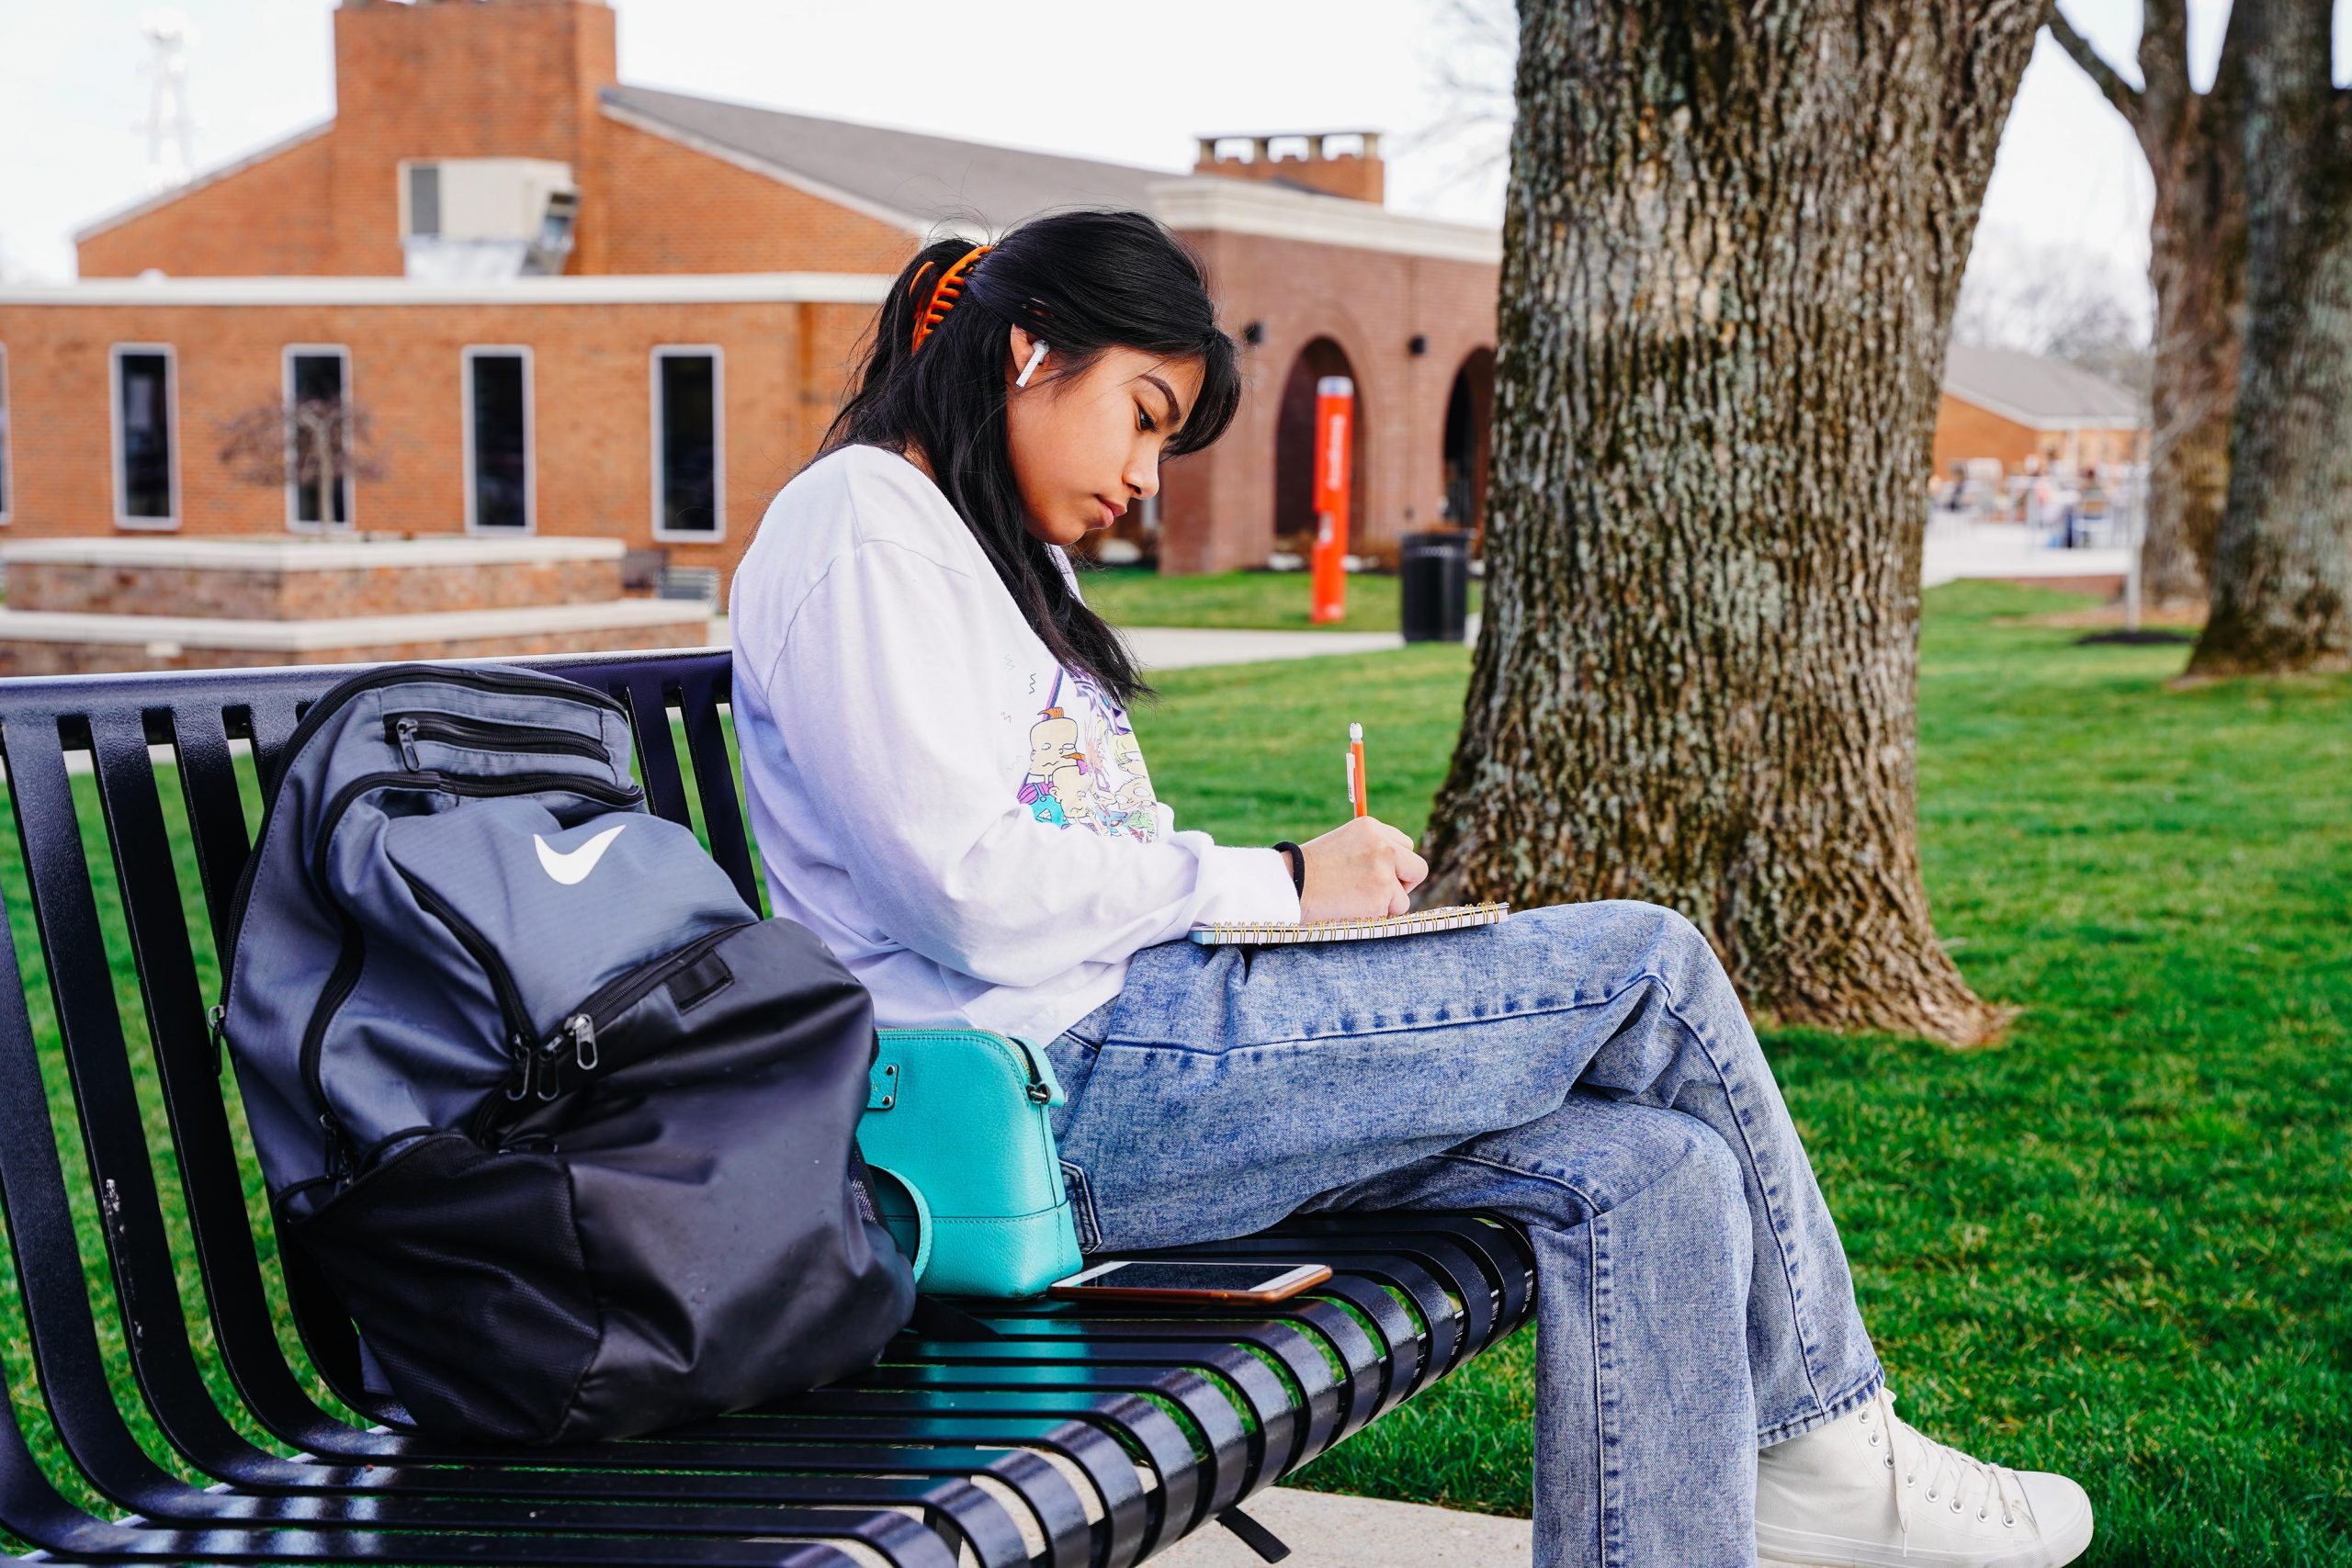 Student sitting on bench and writing